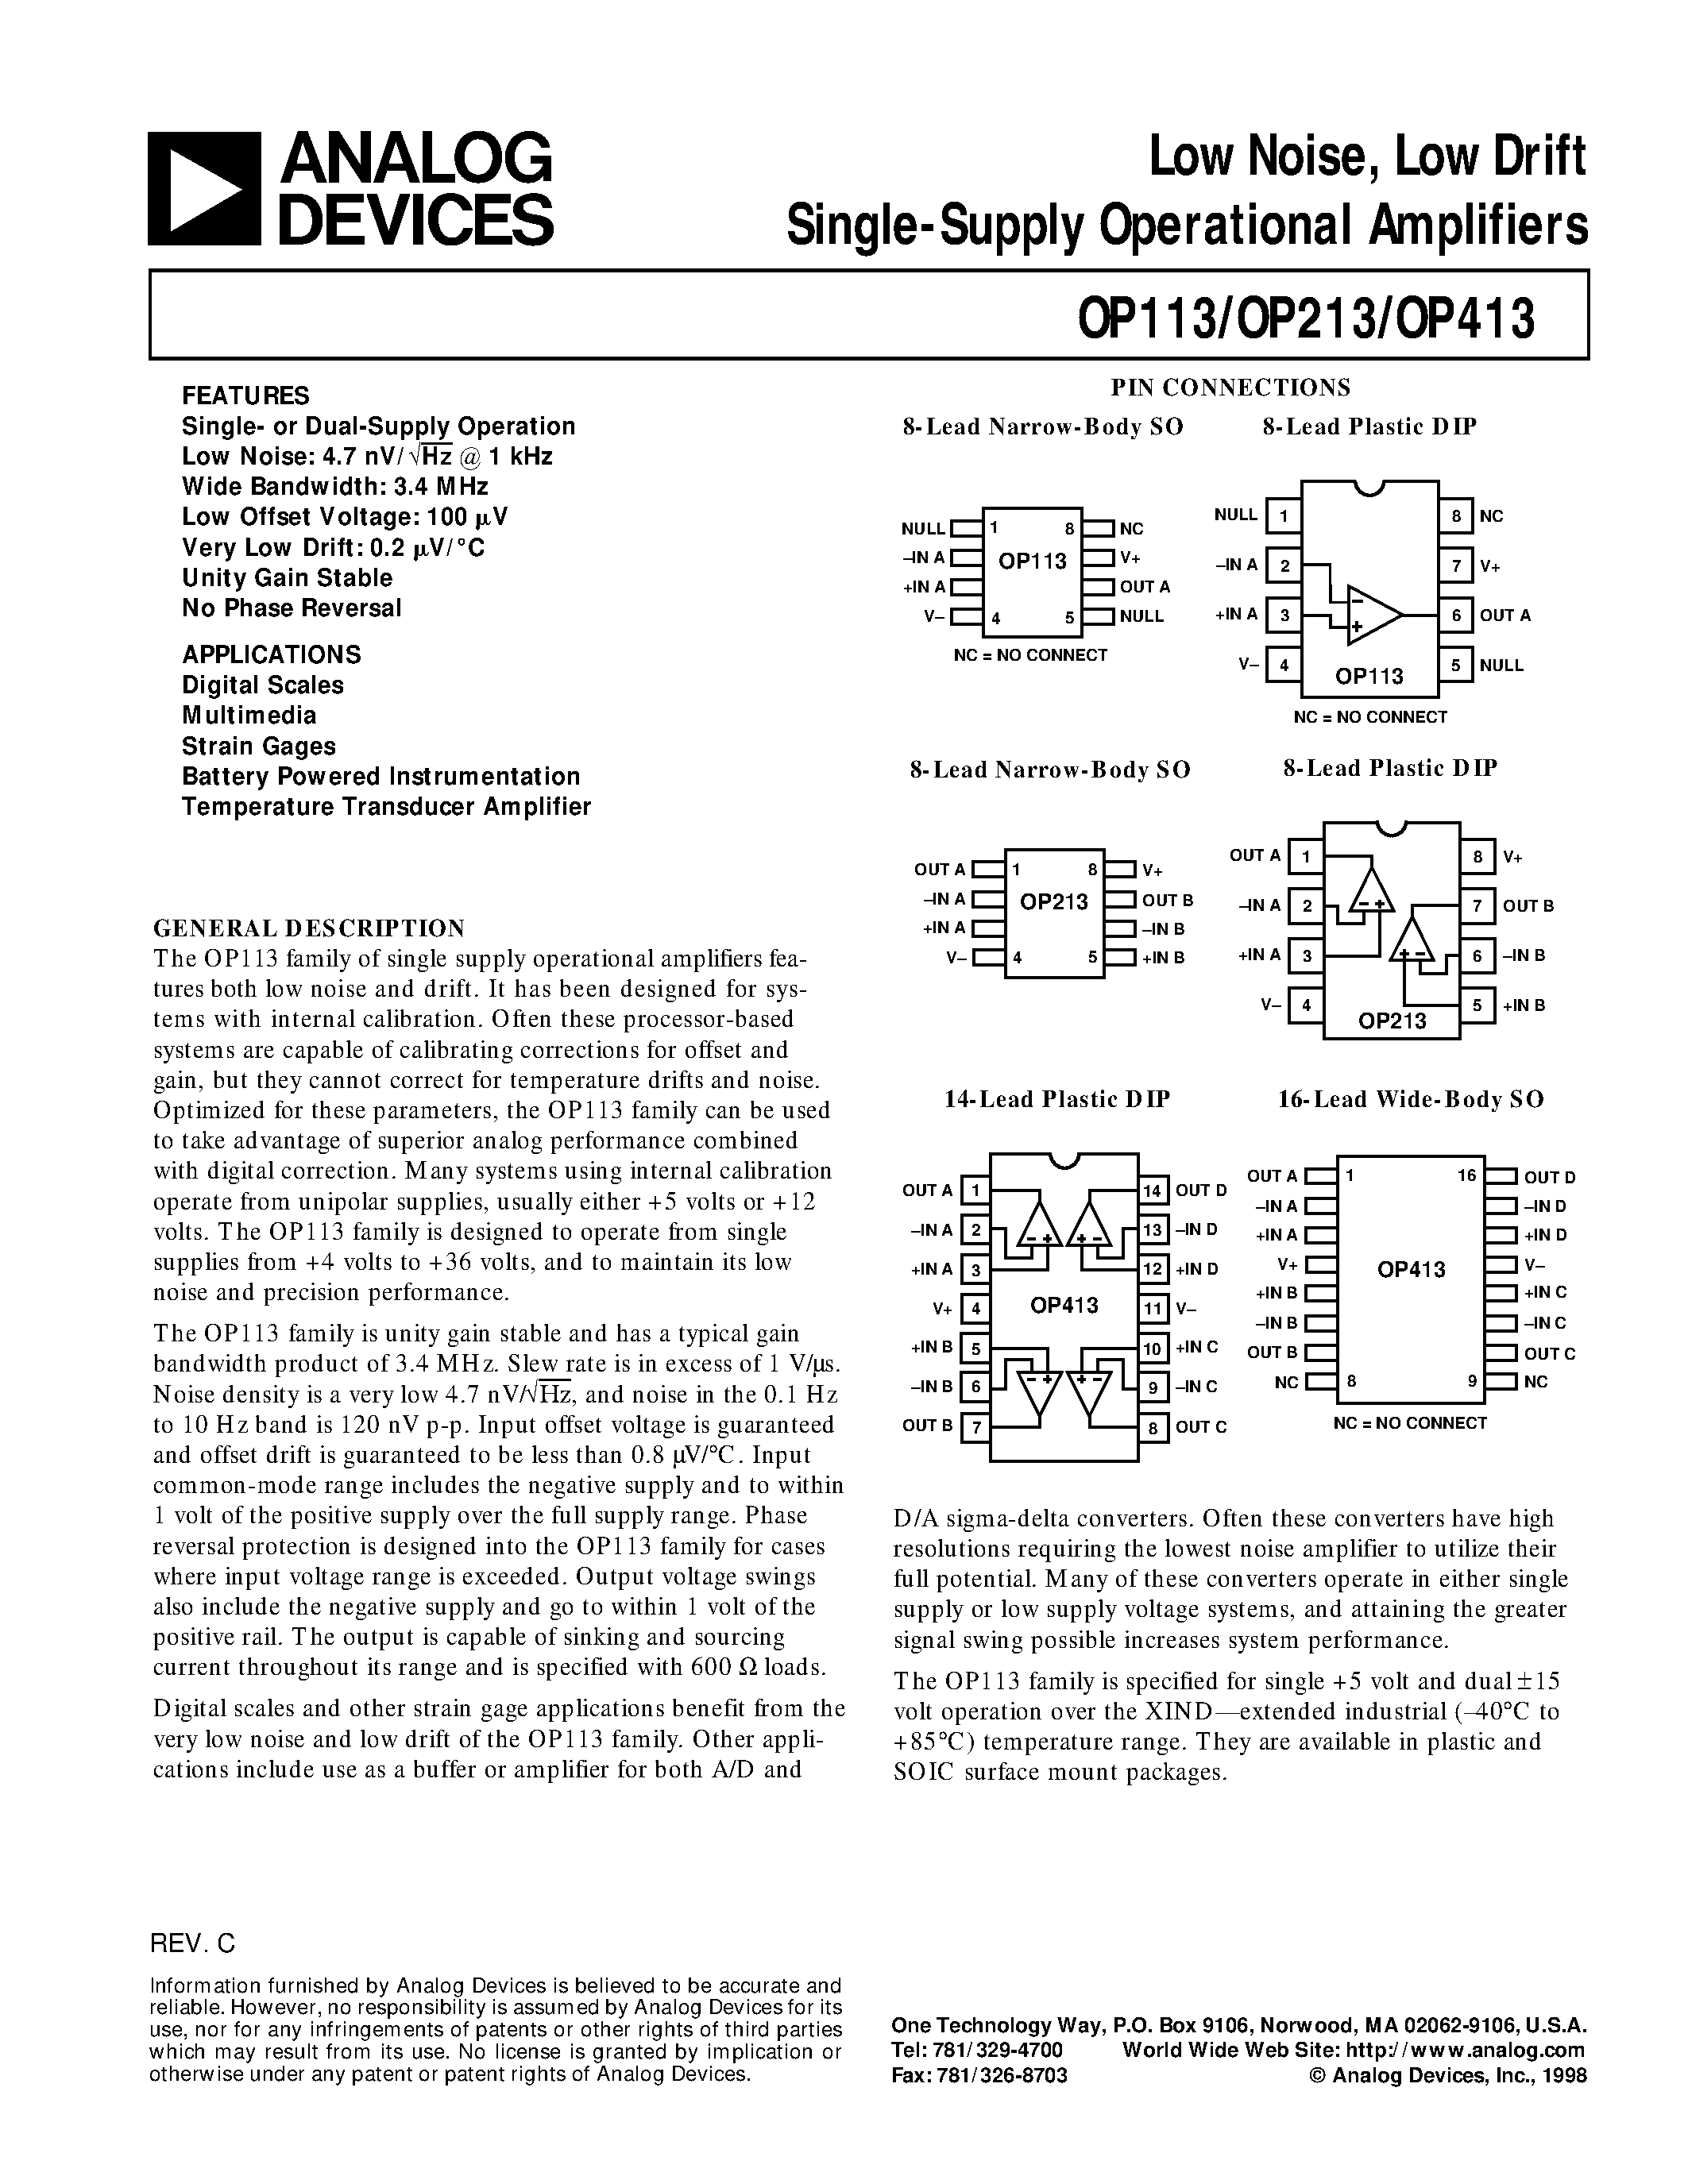 Даташит OP213-Low Noise / Low Drift Single-Supply Operational Amplifiers страница 1